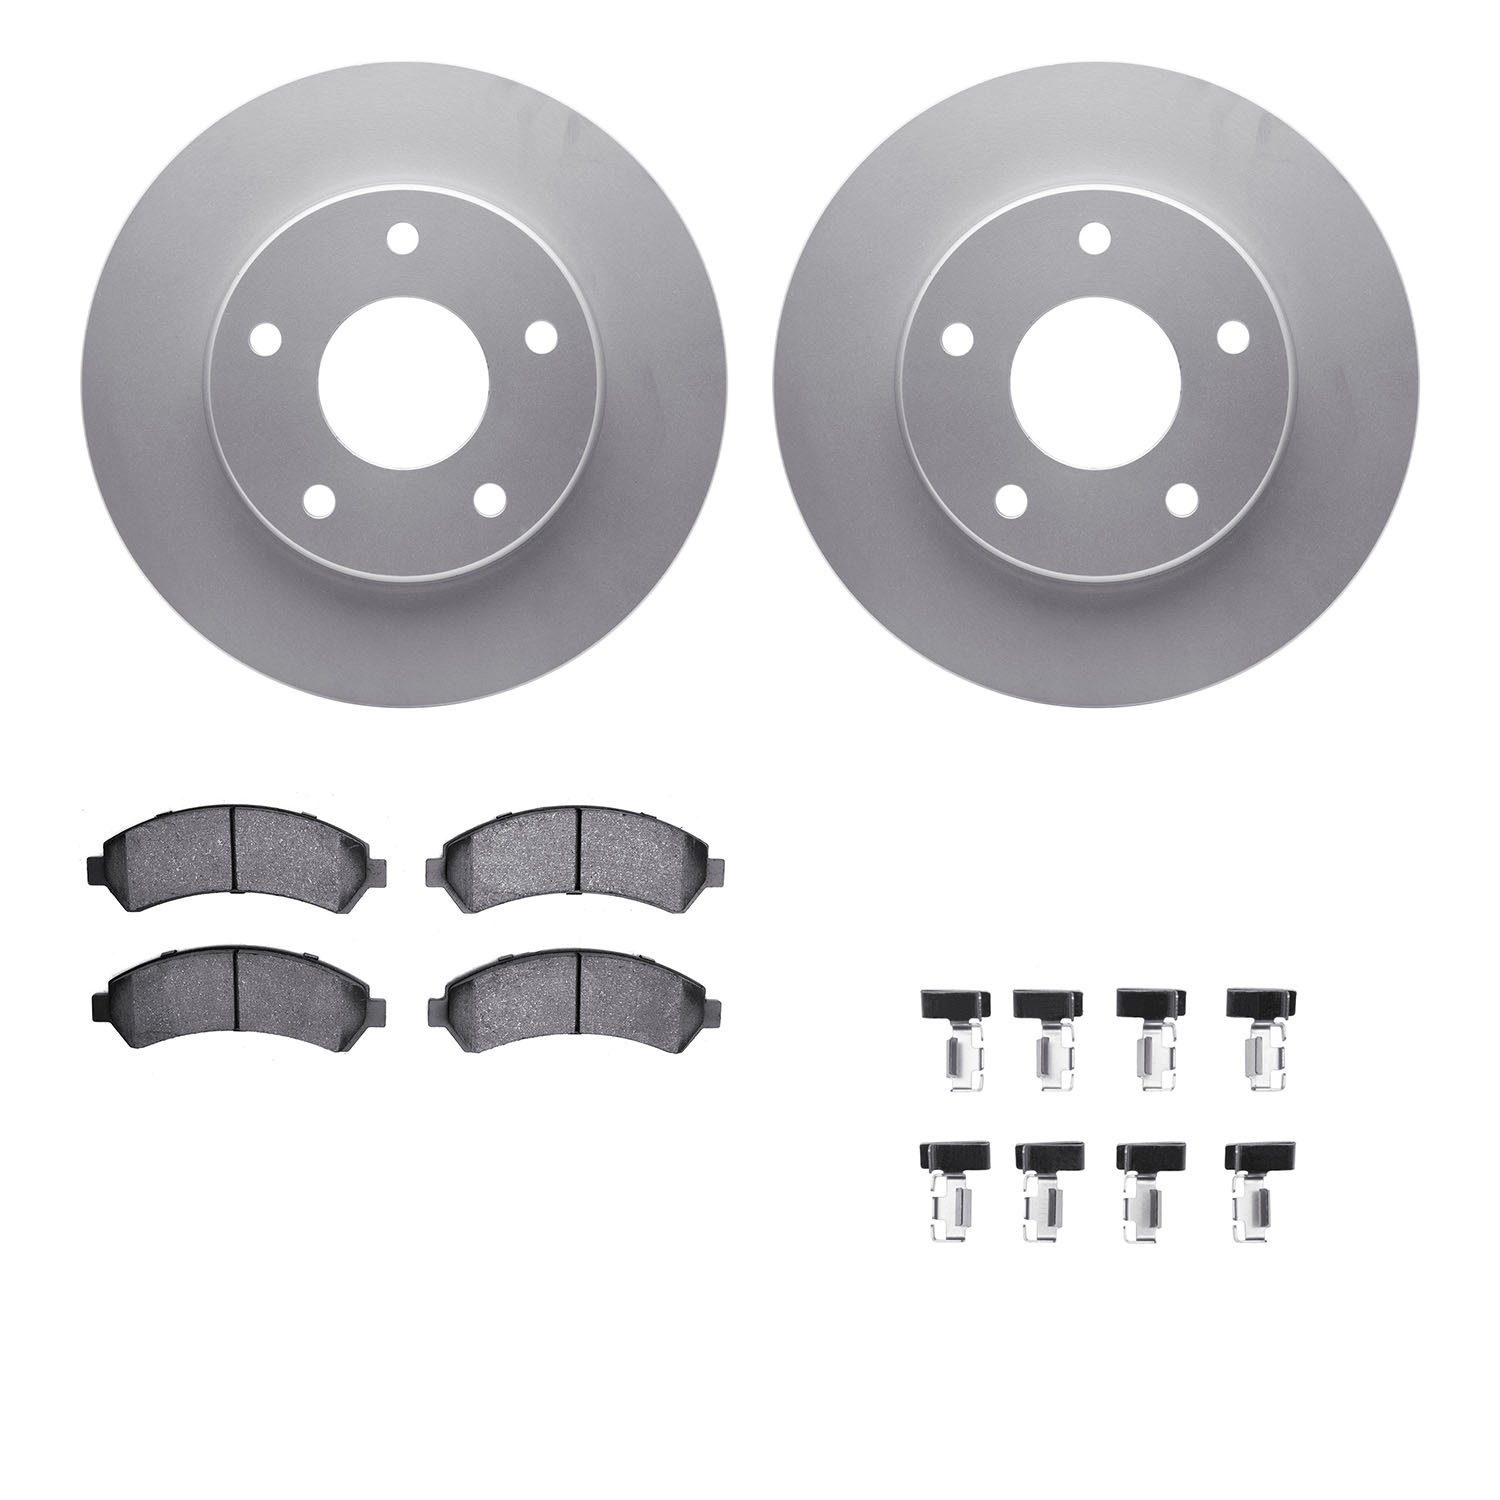 4412-48011 Geospec Brake Rotors with Ultimate-Duty Brake Pads & Hardware, 1997-2005 GM, Position: Front